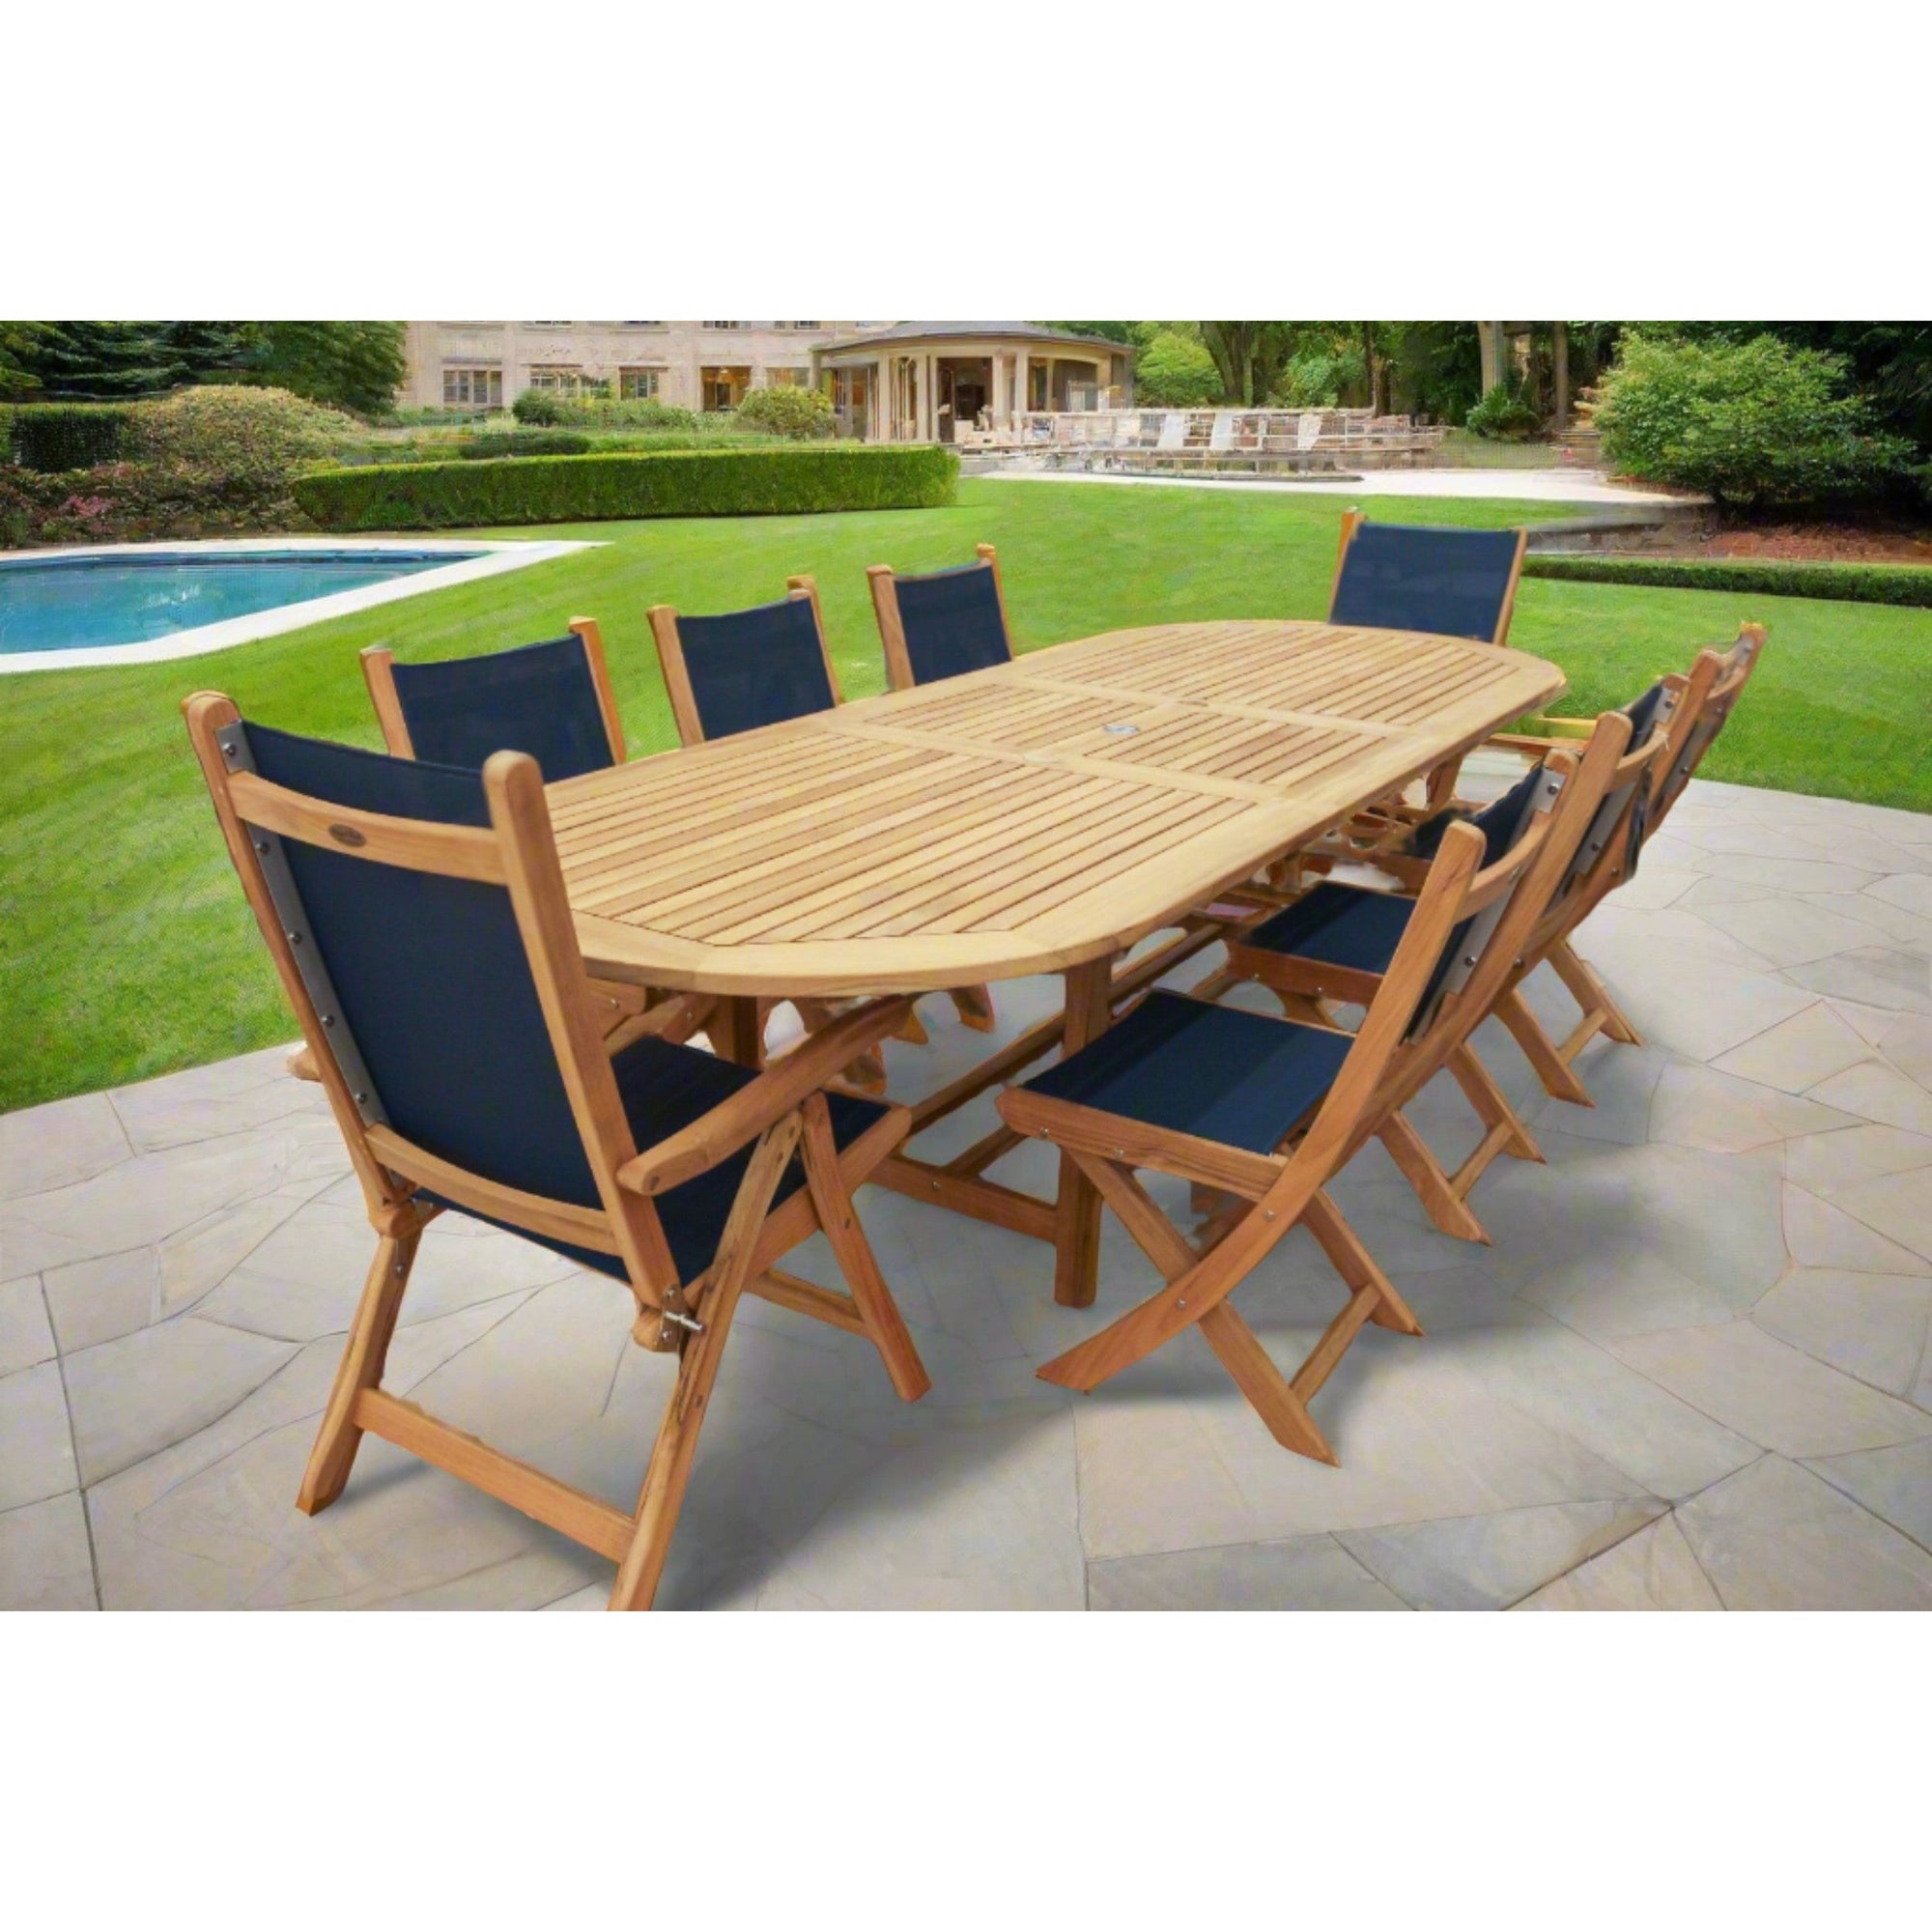 Yacht Teak 9pc Outdoor Dining Set (Teak Oval Extendable Banquet Table 96-120" with 8 Teak Chairs)